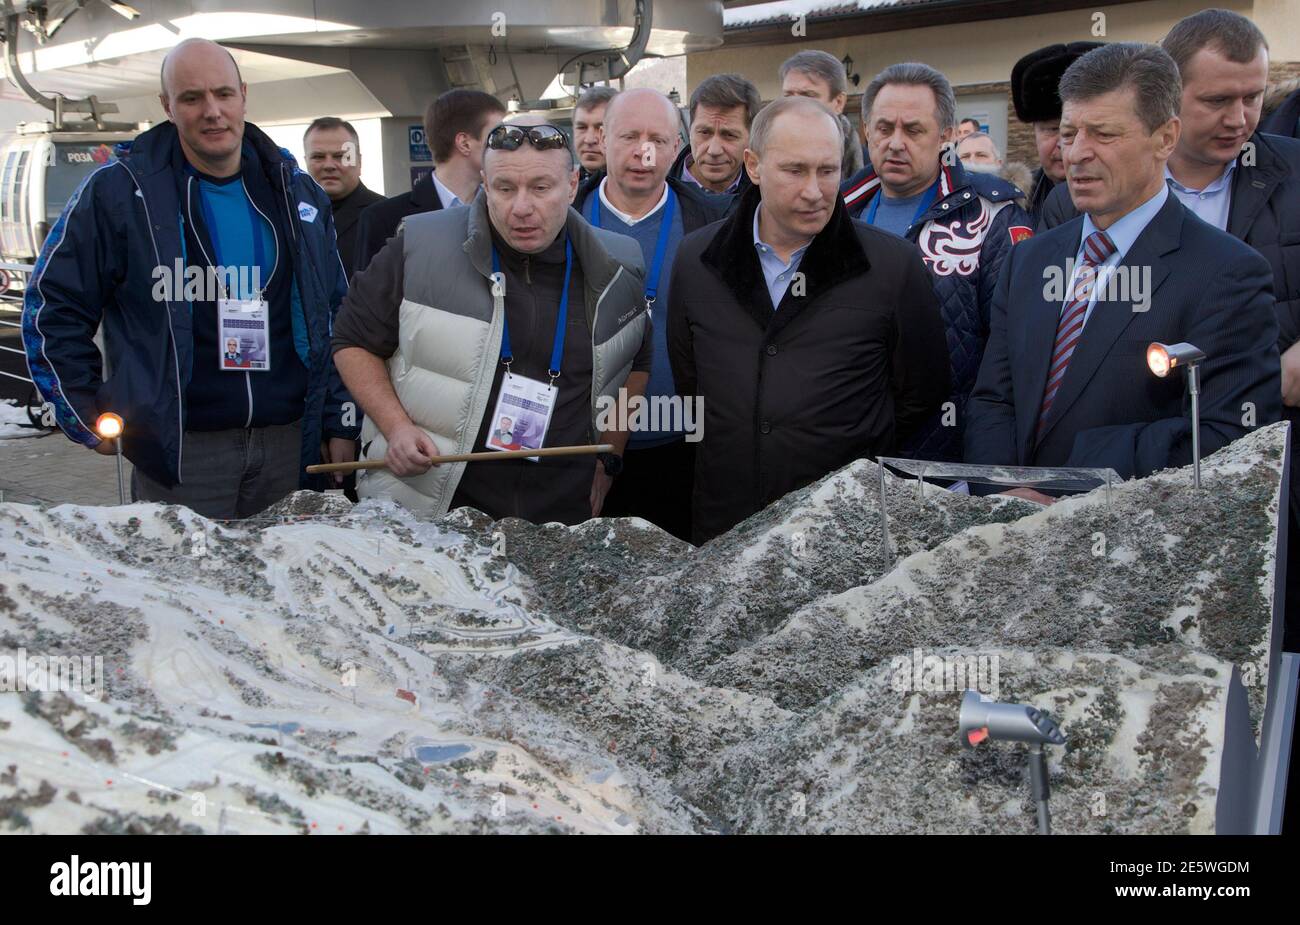 Russia's President Vladimir Putin (2nd R) listens to Interros Company President Vladimir Potanin (2nd L), with Sochi 2014 chief Dmitry Chernyshenko (L) and deputy Prime Minister Dmitry Kozak (R) standing nearby, as he visits the Rosa Khutor Alpine Center in Rosa Khutor outside the Black Sea resort of Sochi, February 6, 2013. Putin on Wednesday toured objects of the Olympic mountain cluster, which will host the 2014 Winter Olympic Games.  REUTERS/Ivan Sekretarev/Pool (RUSSIA - Tags: POLITICS SPORT OLYMPICS BUSINESS) Stock Photo